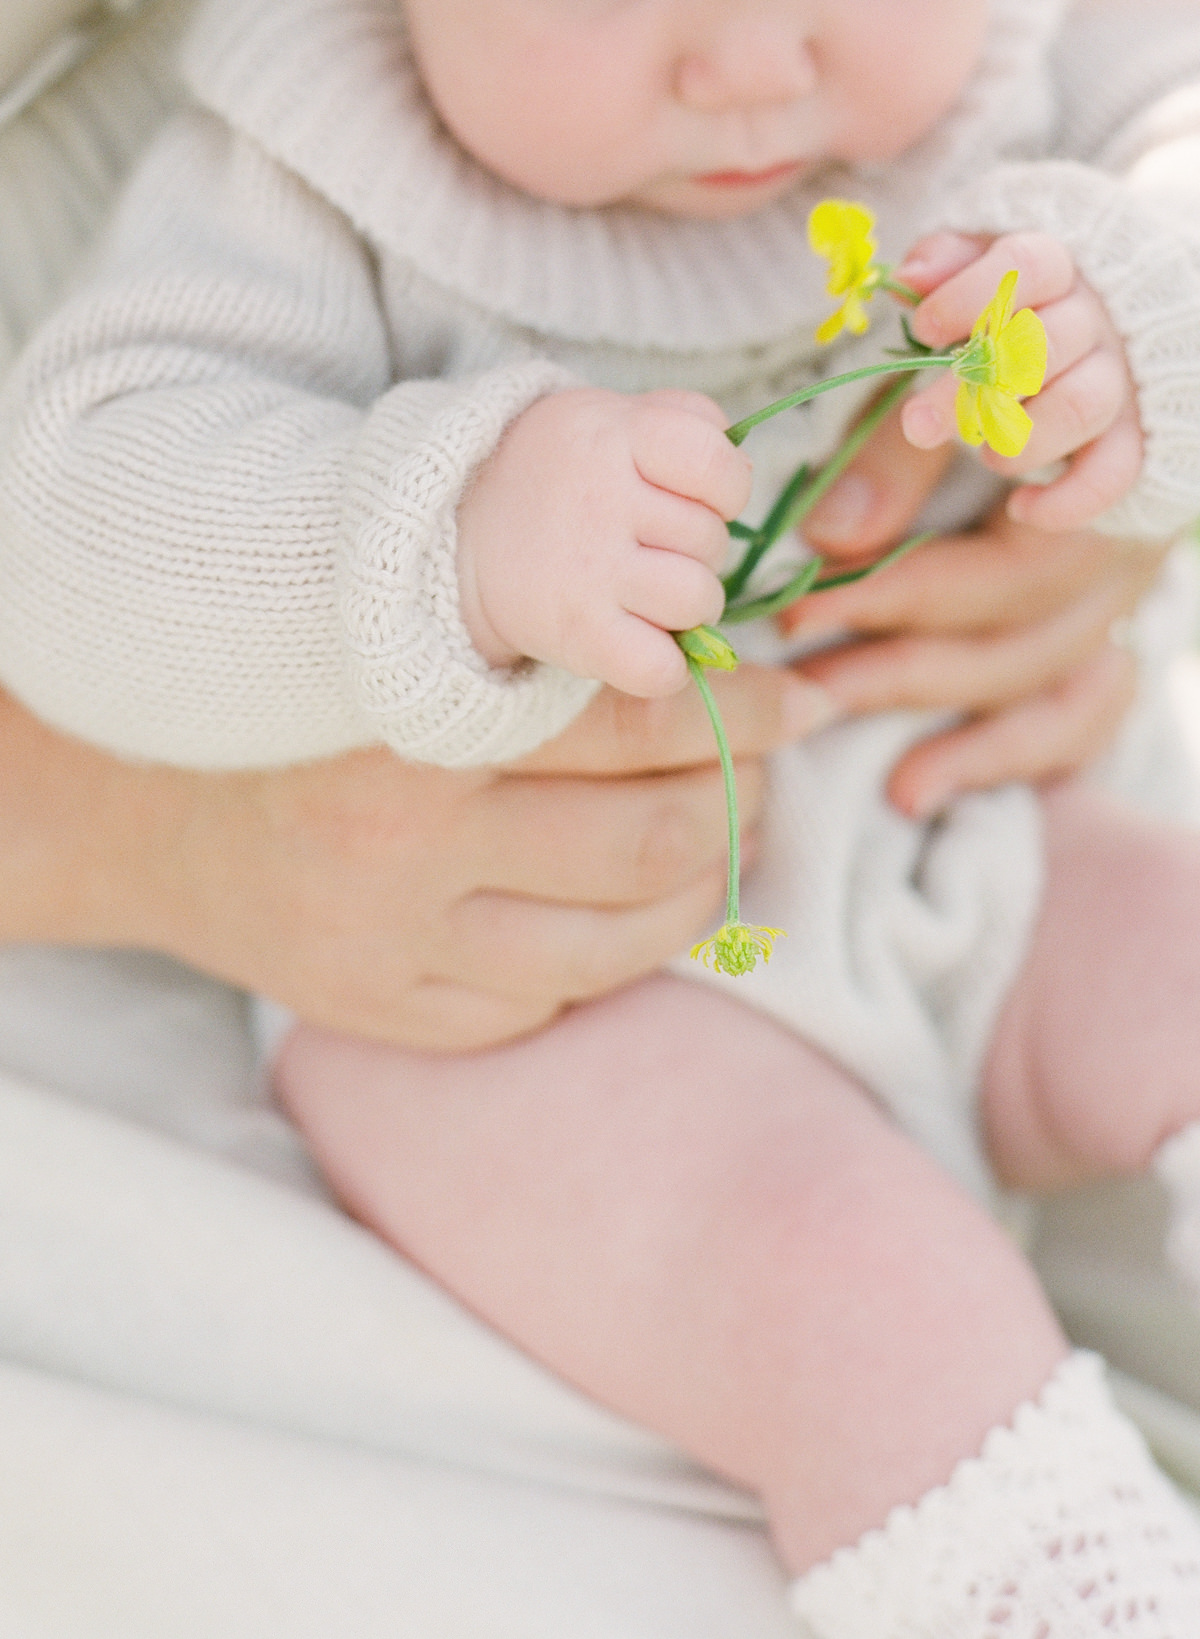 Kent-Avenue-Photography-Charlotte-Newborn-Photographers-On-Film-Baby-holds-Flowers-in-hand